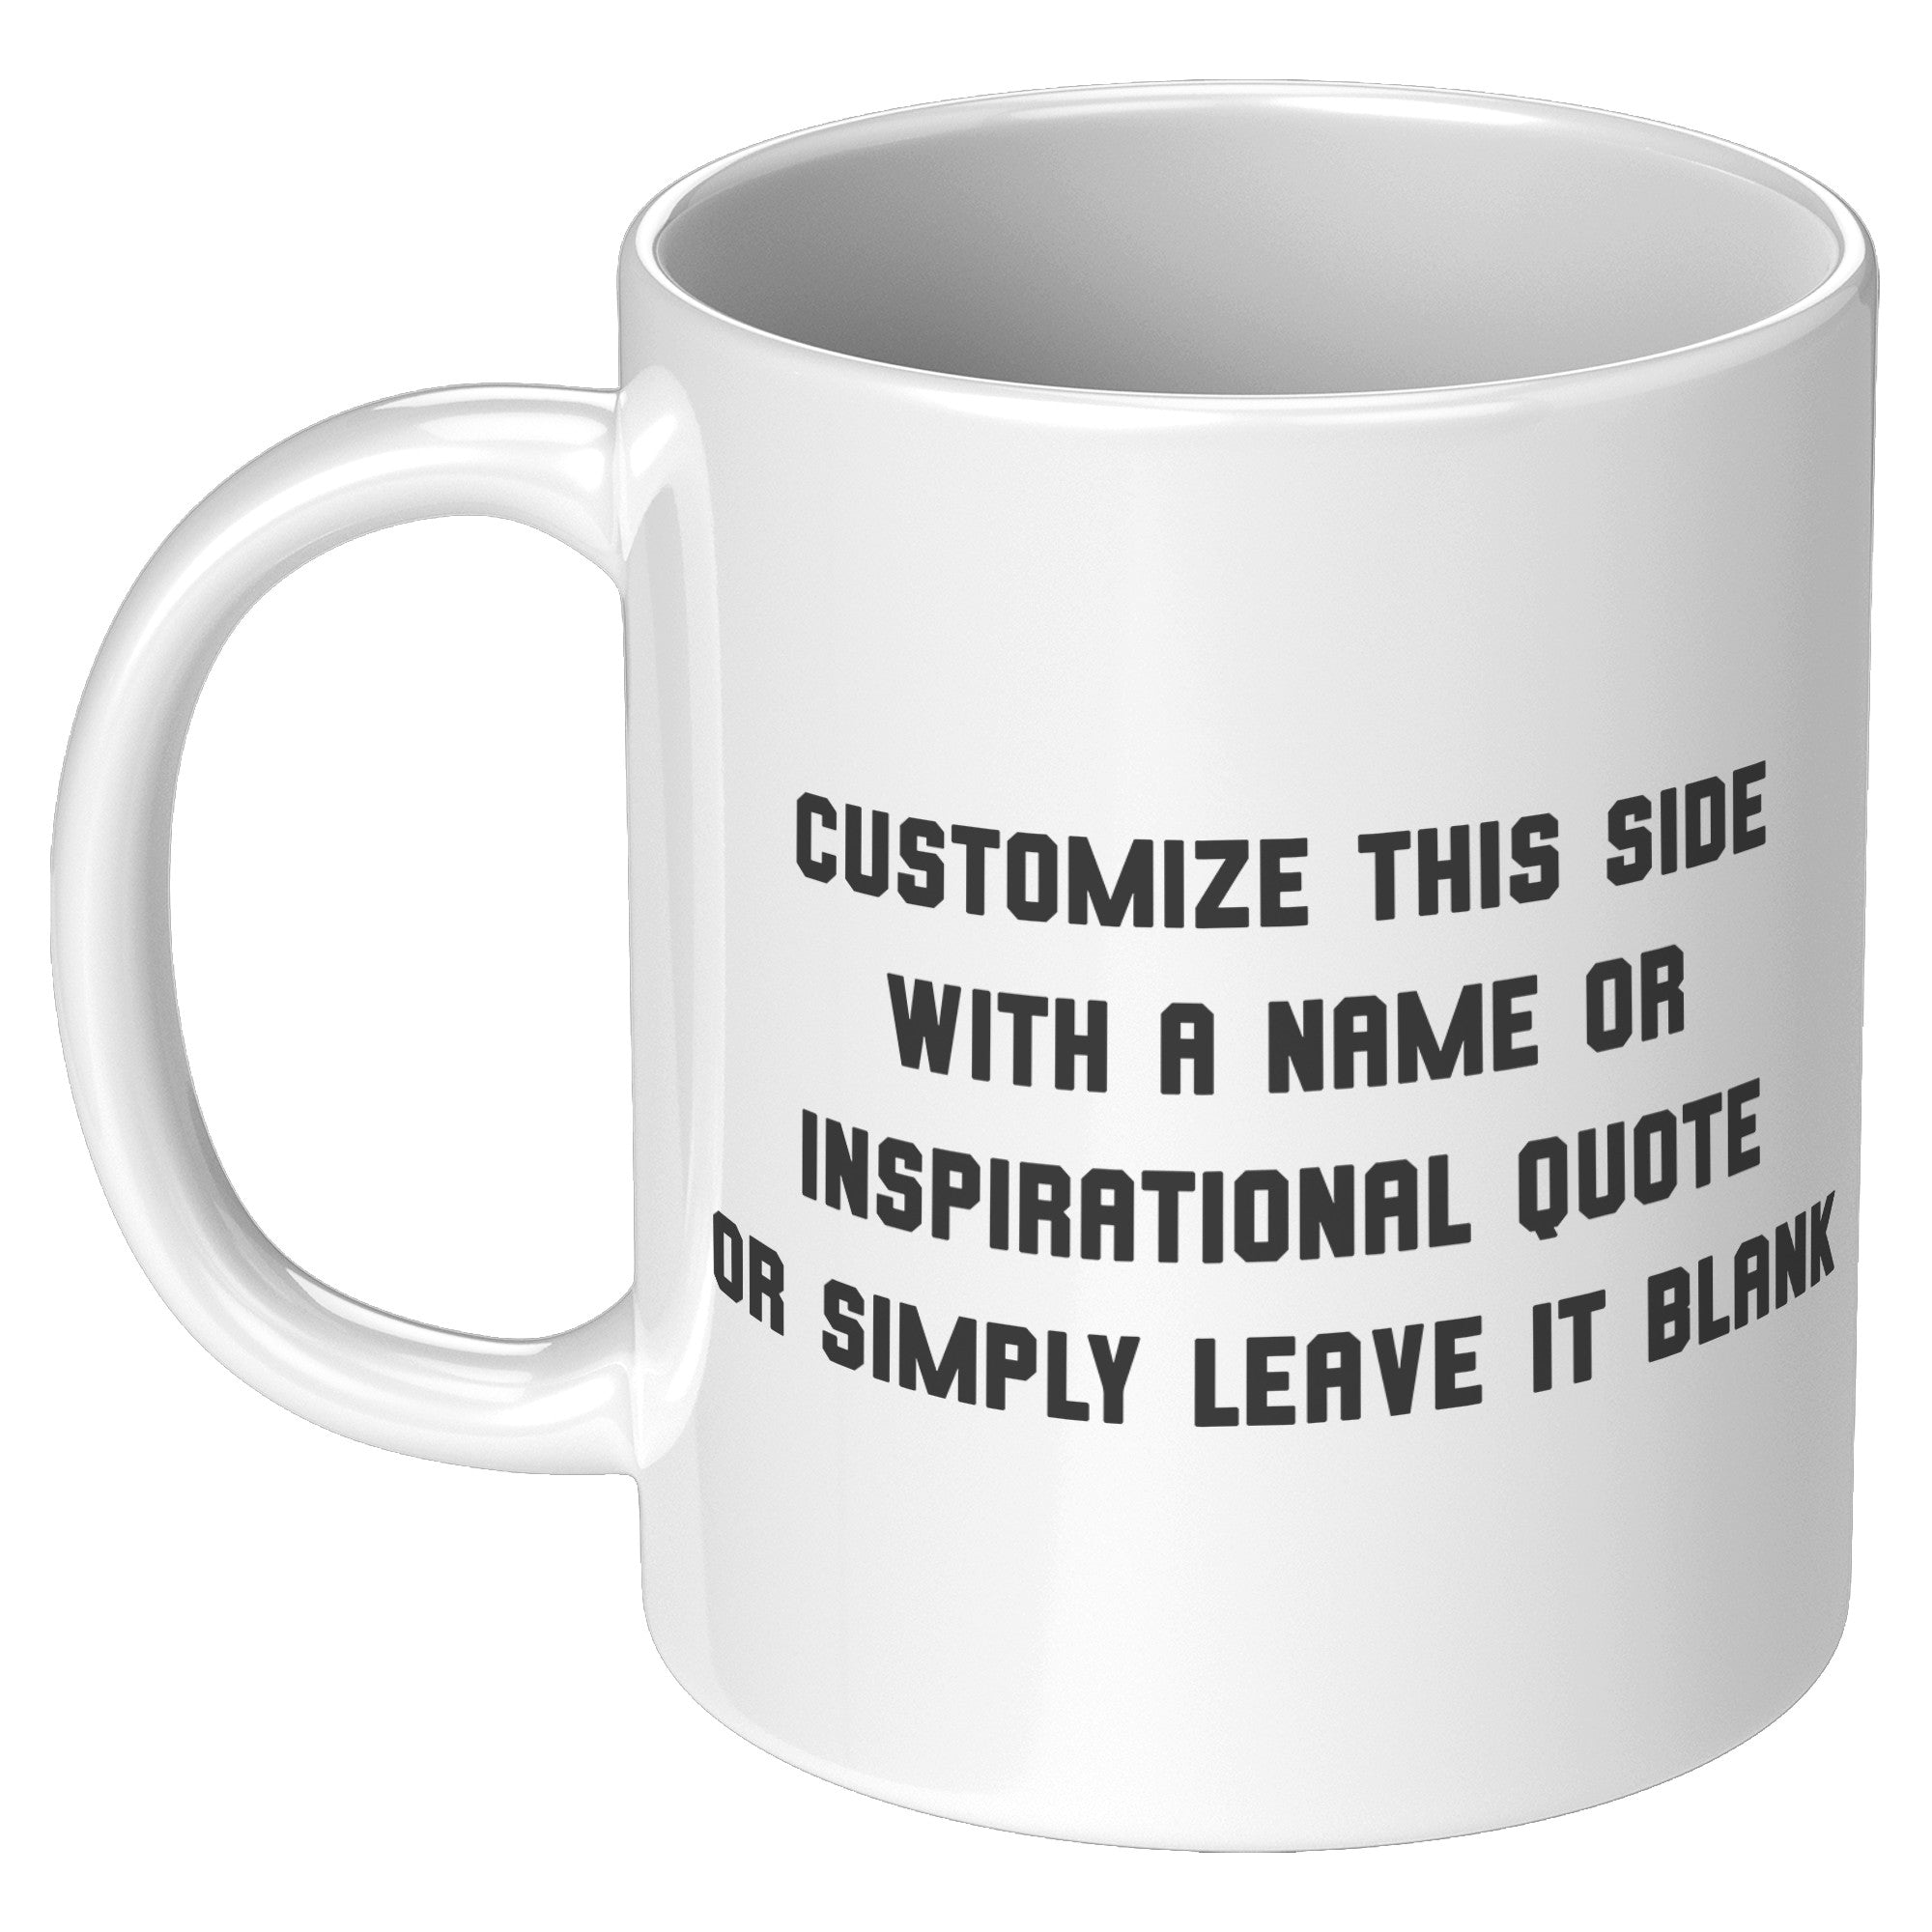 Male Runner Inspirational Mug - Motivational Running Quotes Cup - Perfect Gift for Marathon Men - Runner's Daily Dose of Determination - H